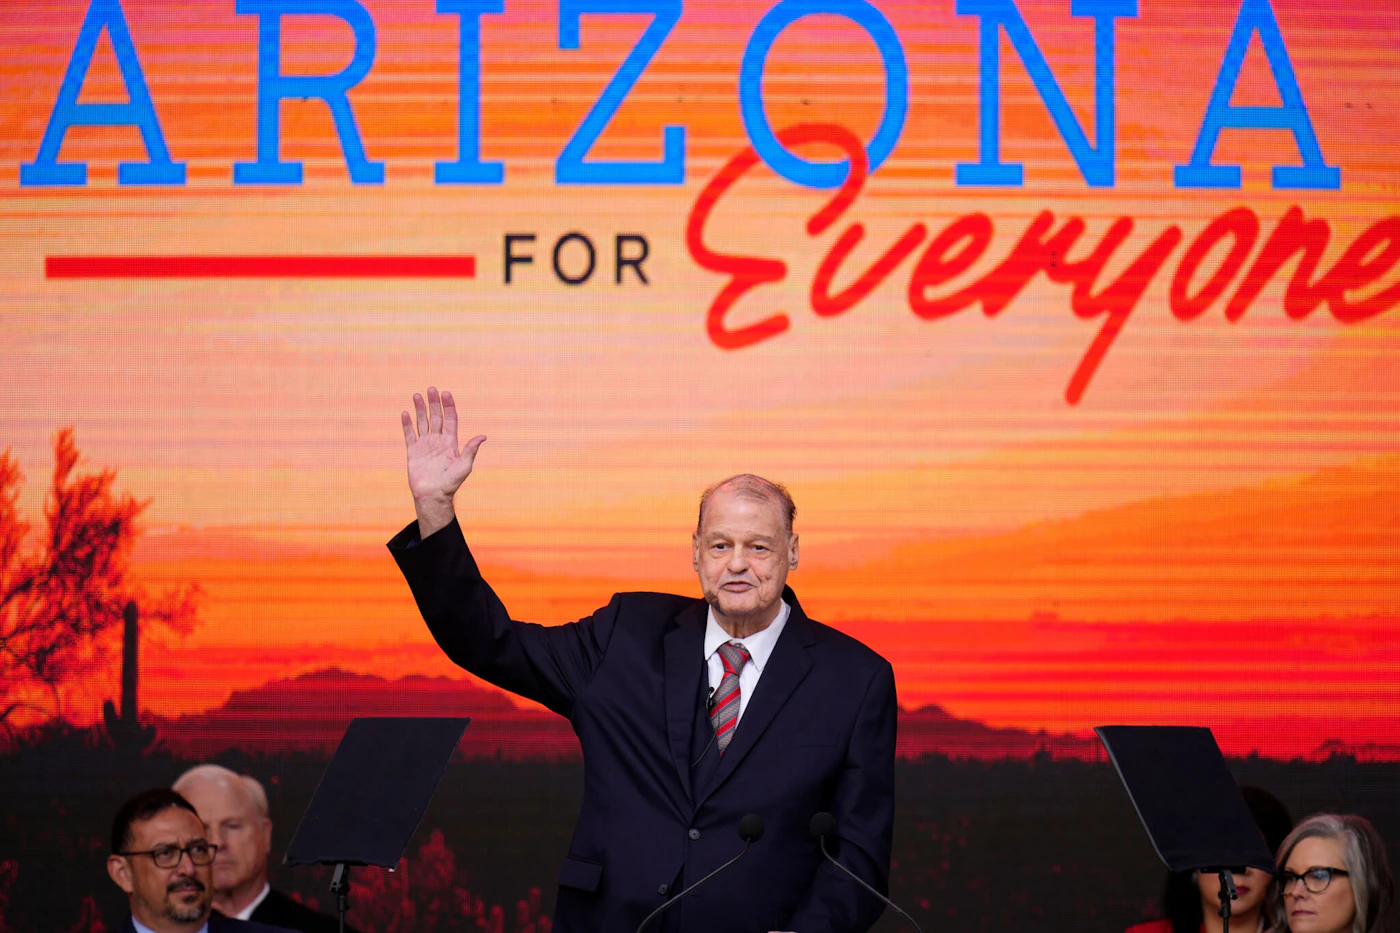 New Arizona State Superintendent of Public Instruction Tom Horne, a Republican, waves to the crowd after speaking and taking the ceremonial oath of office in a public ceremony at the state Capitol in Phoenix, Thursday, Jan. 5, 2023. (AP Photo/Ross D. Franklin)